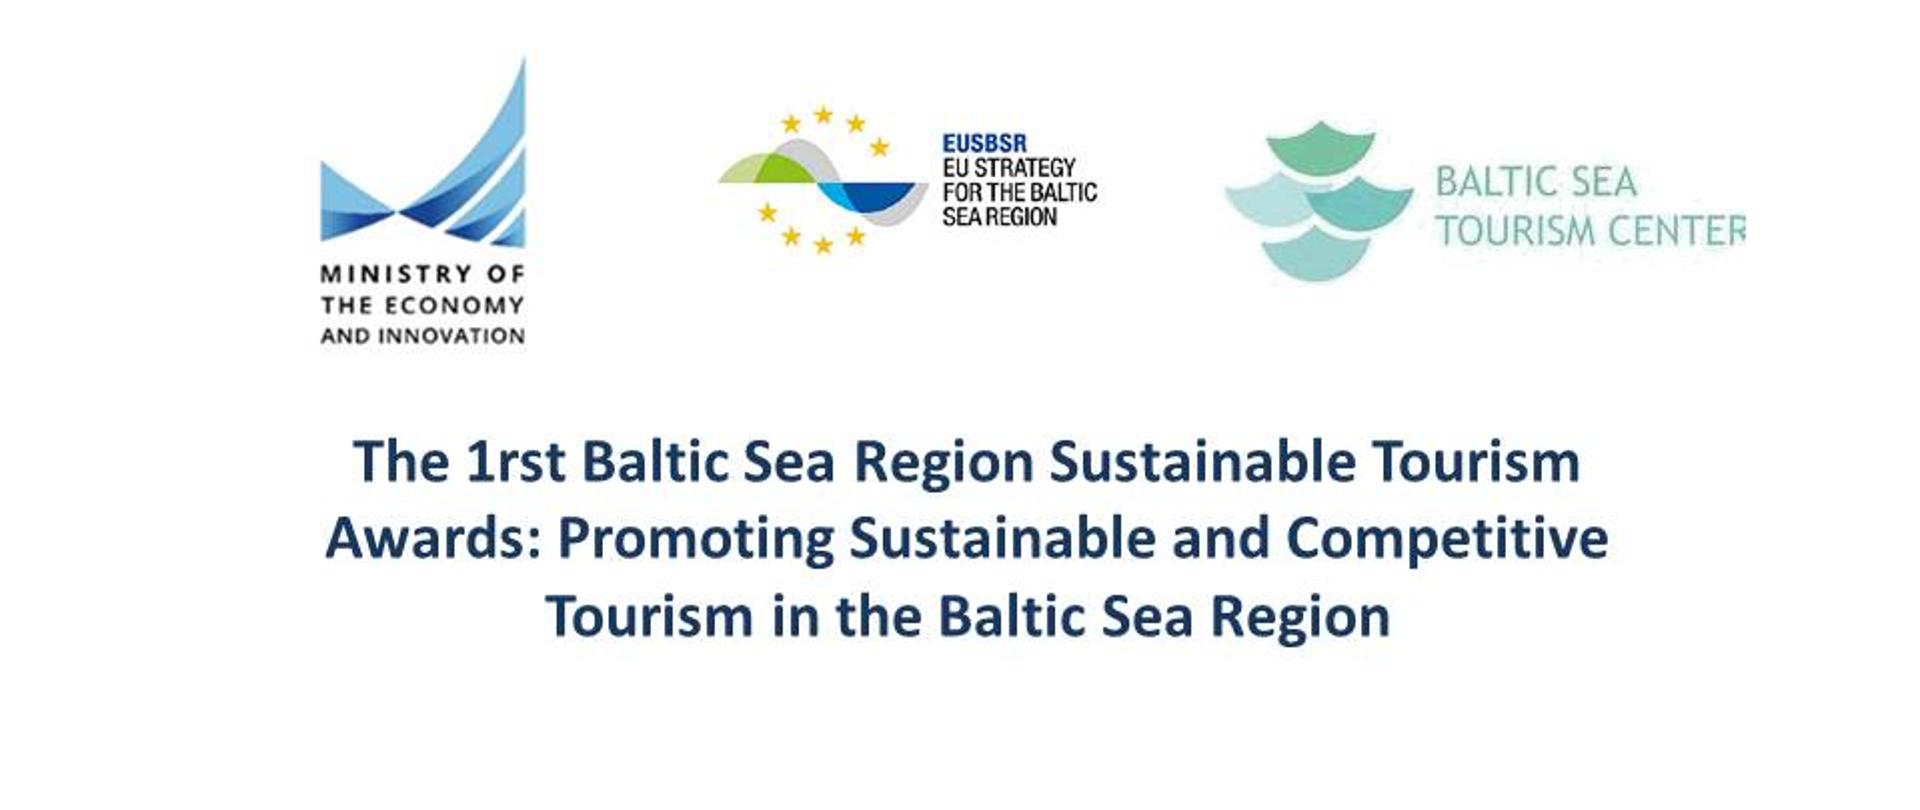 The 1rst Baltic Sea Region Sustainable Tourism Awards: Promoting Sustainable and Competitive Tourism in the Baltic Sea Region